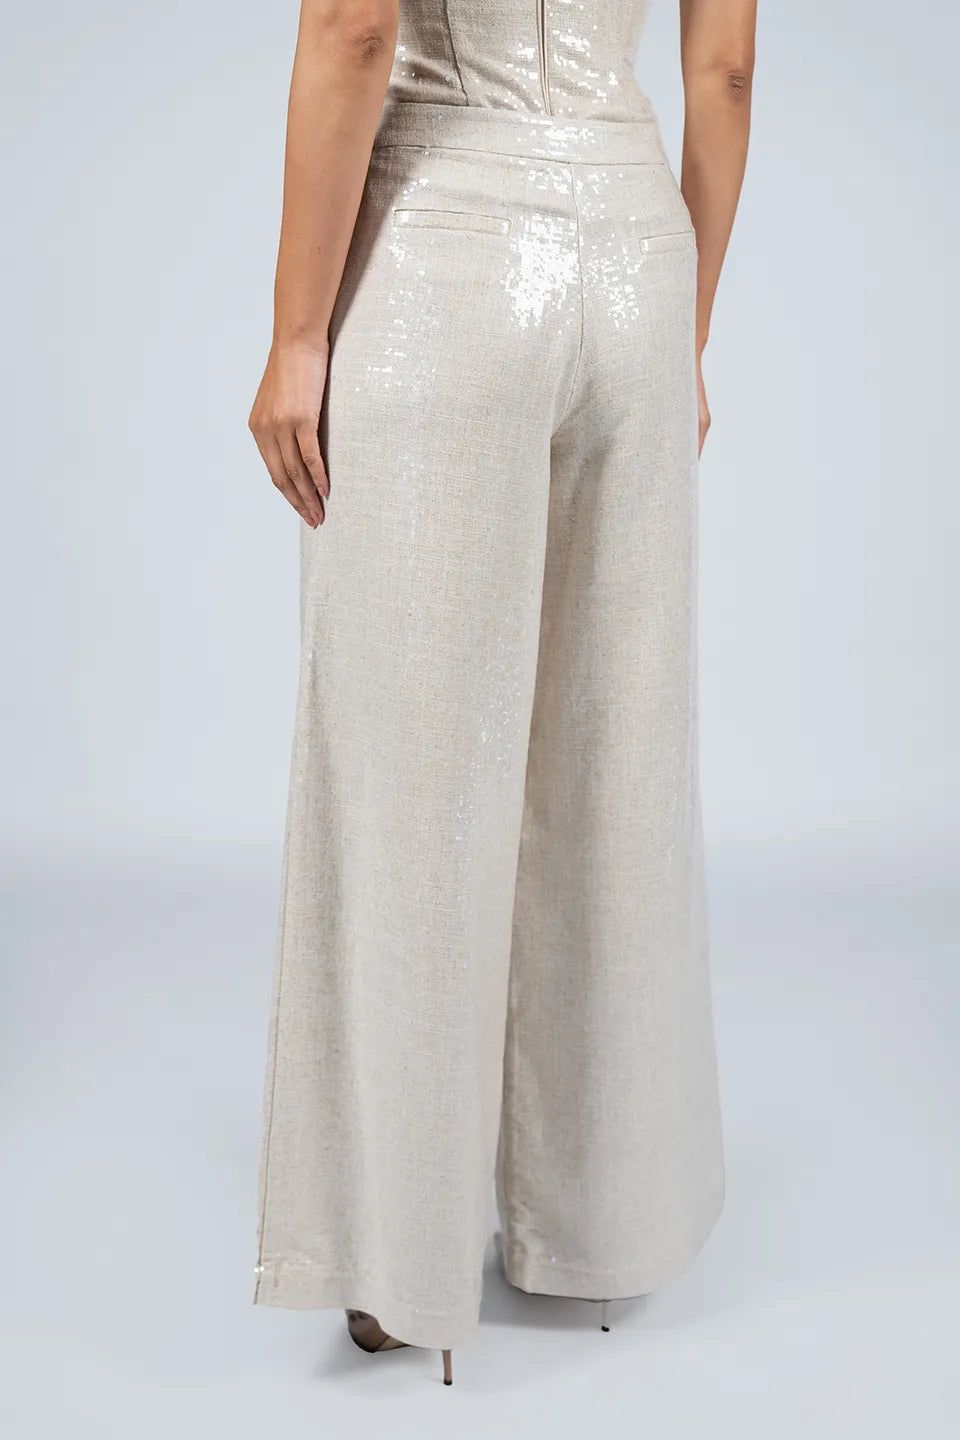 Designer Beige Women pants, shop online with free delivery in UAE. Product gallery 4